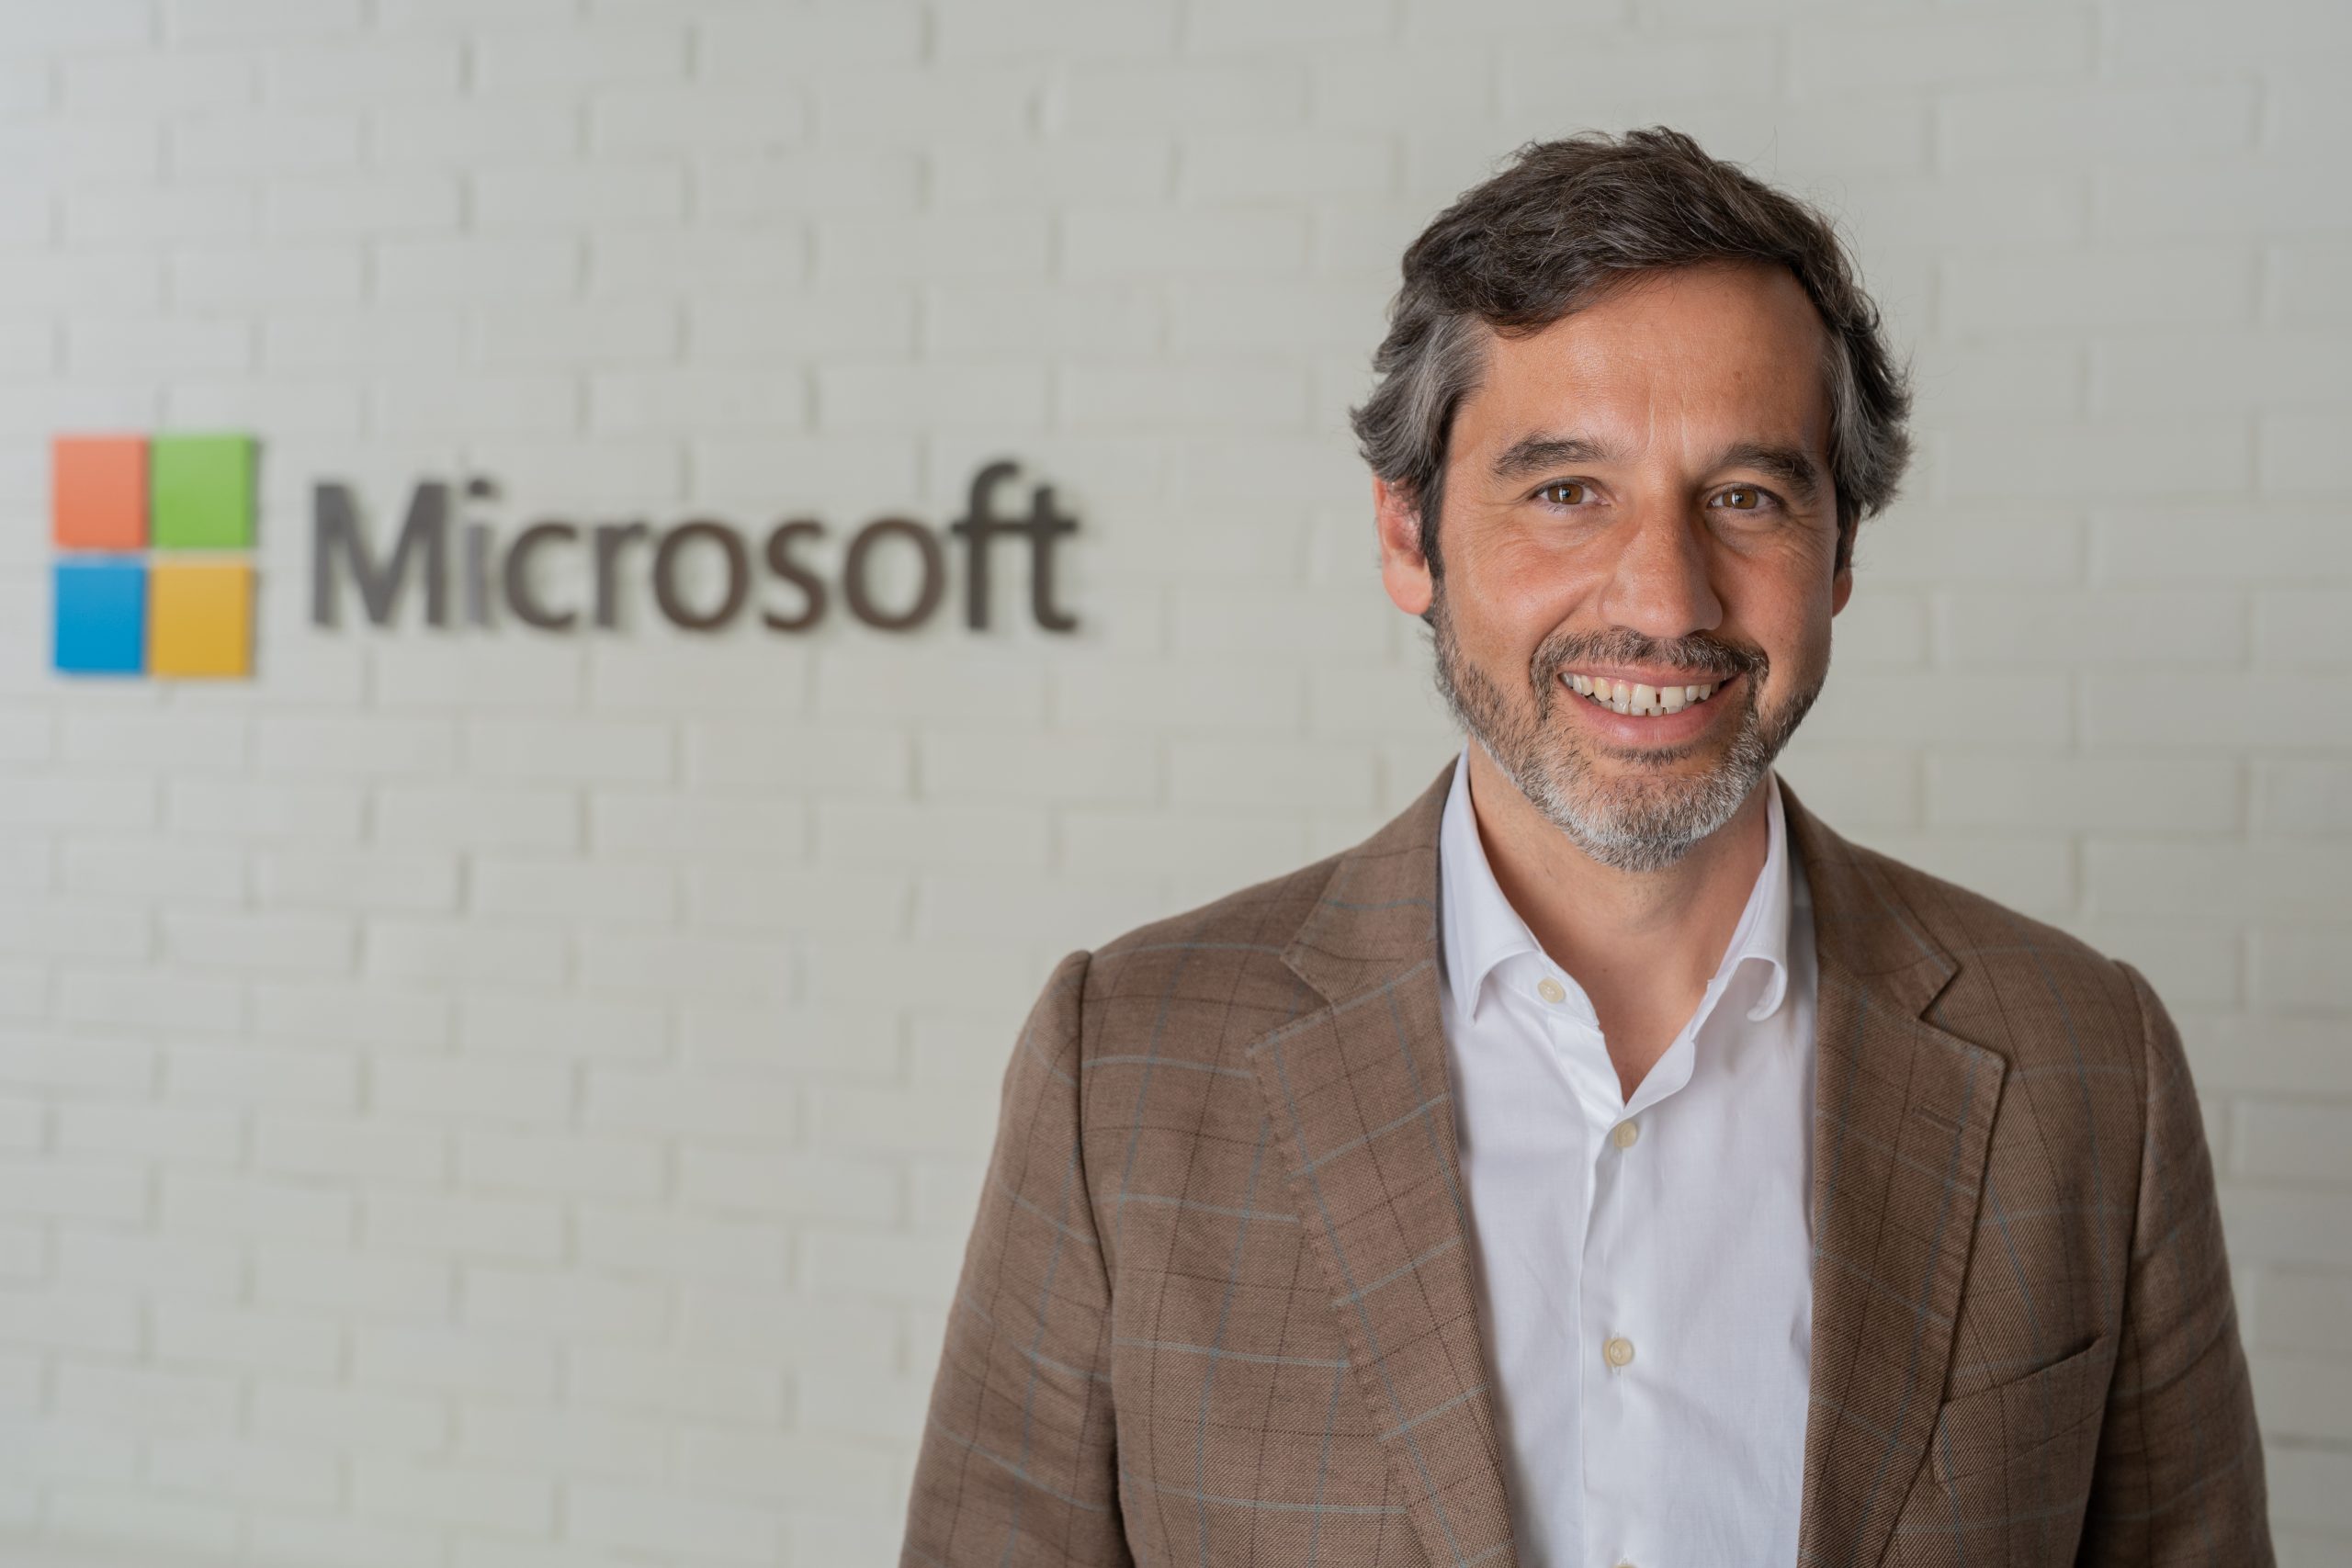 Picture of Pedro Pinto Lourenço, smiling at the camera, with Microsoft logo in the background